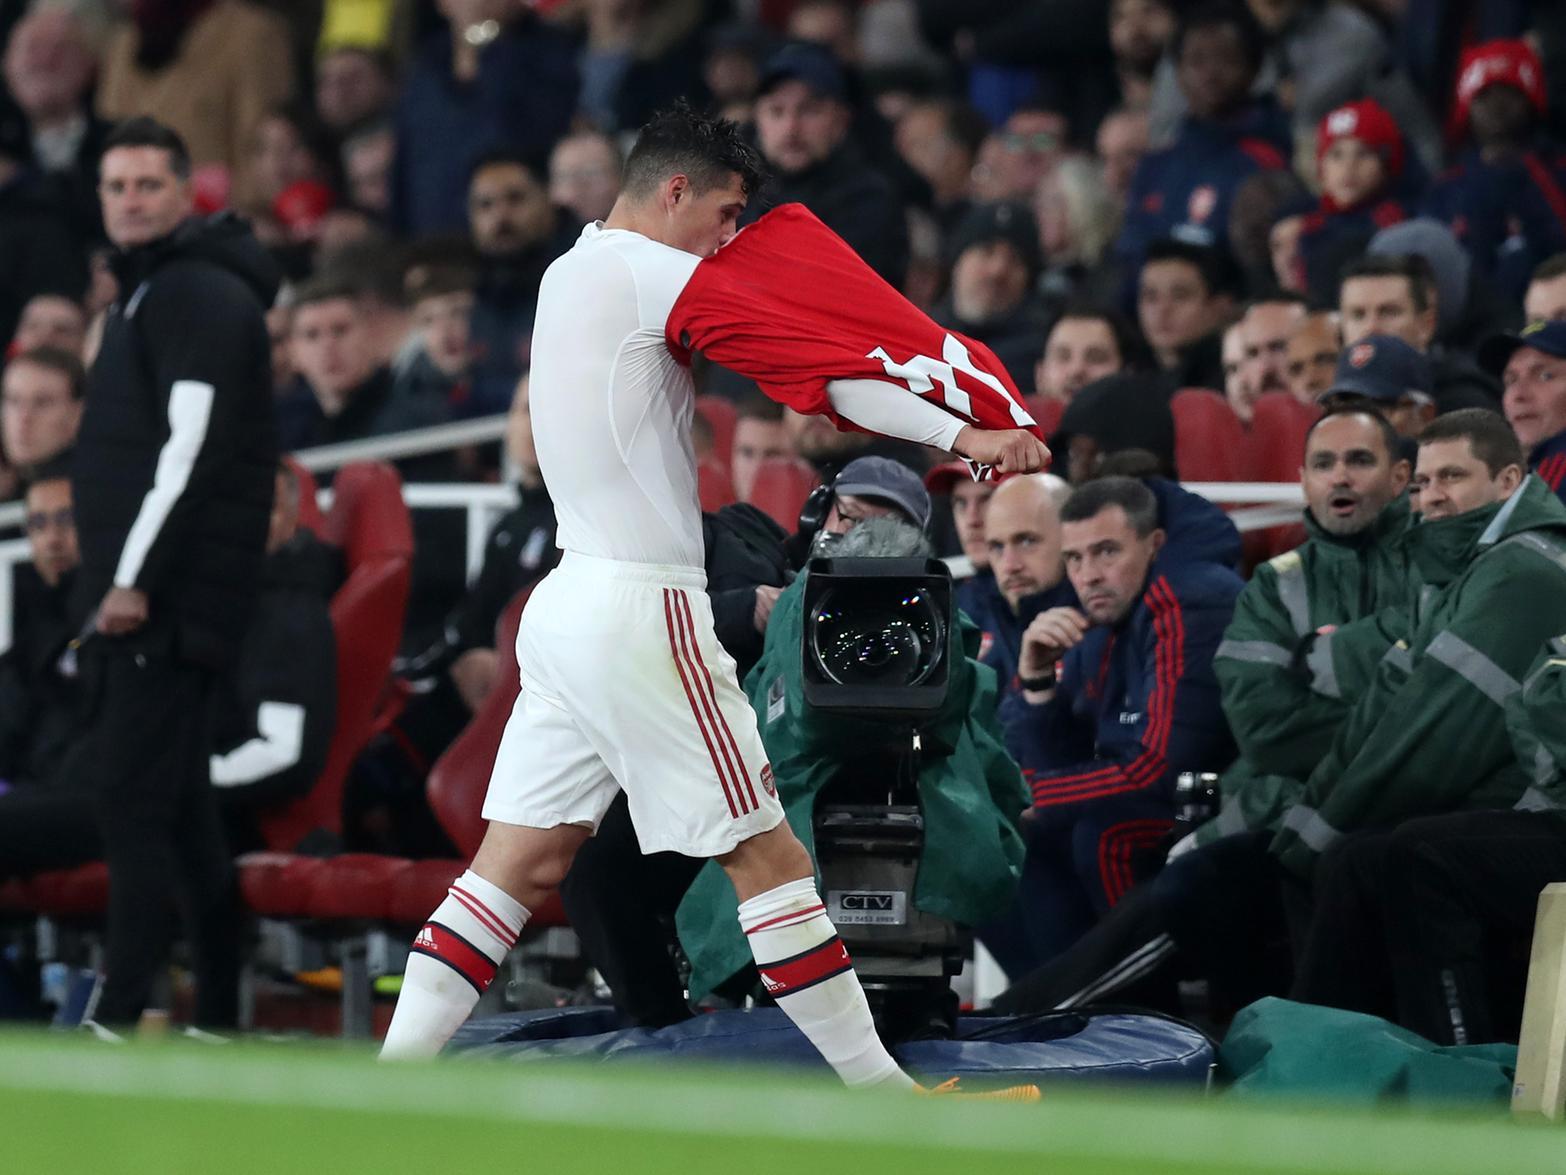 Granit Xhaka's last match in a Gunners shirt saw him booed off the field, and stripped of the captaincy. Unai Emery has hinted that he could play this weekend, in what should be an easy task for Arsenal.